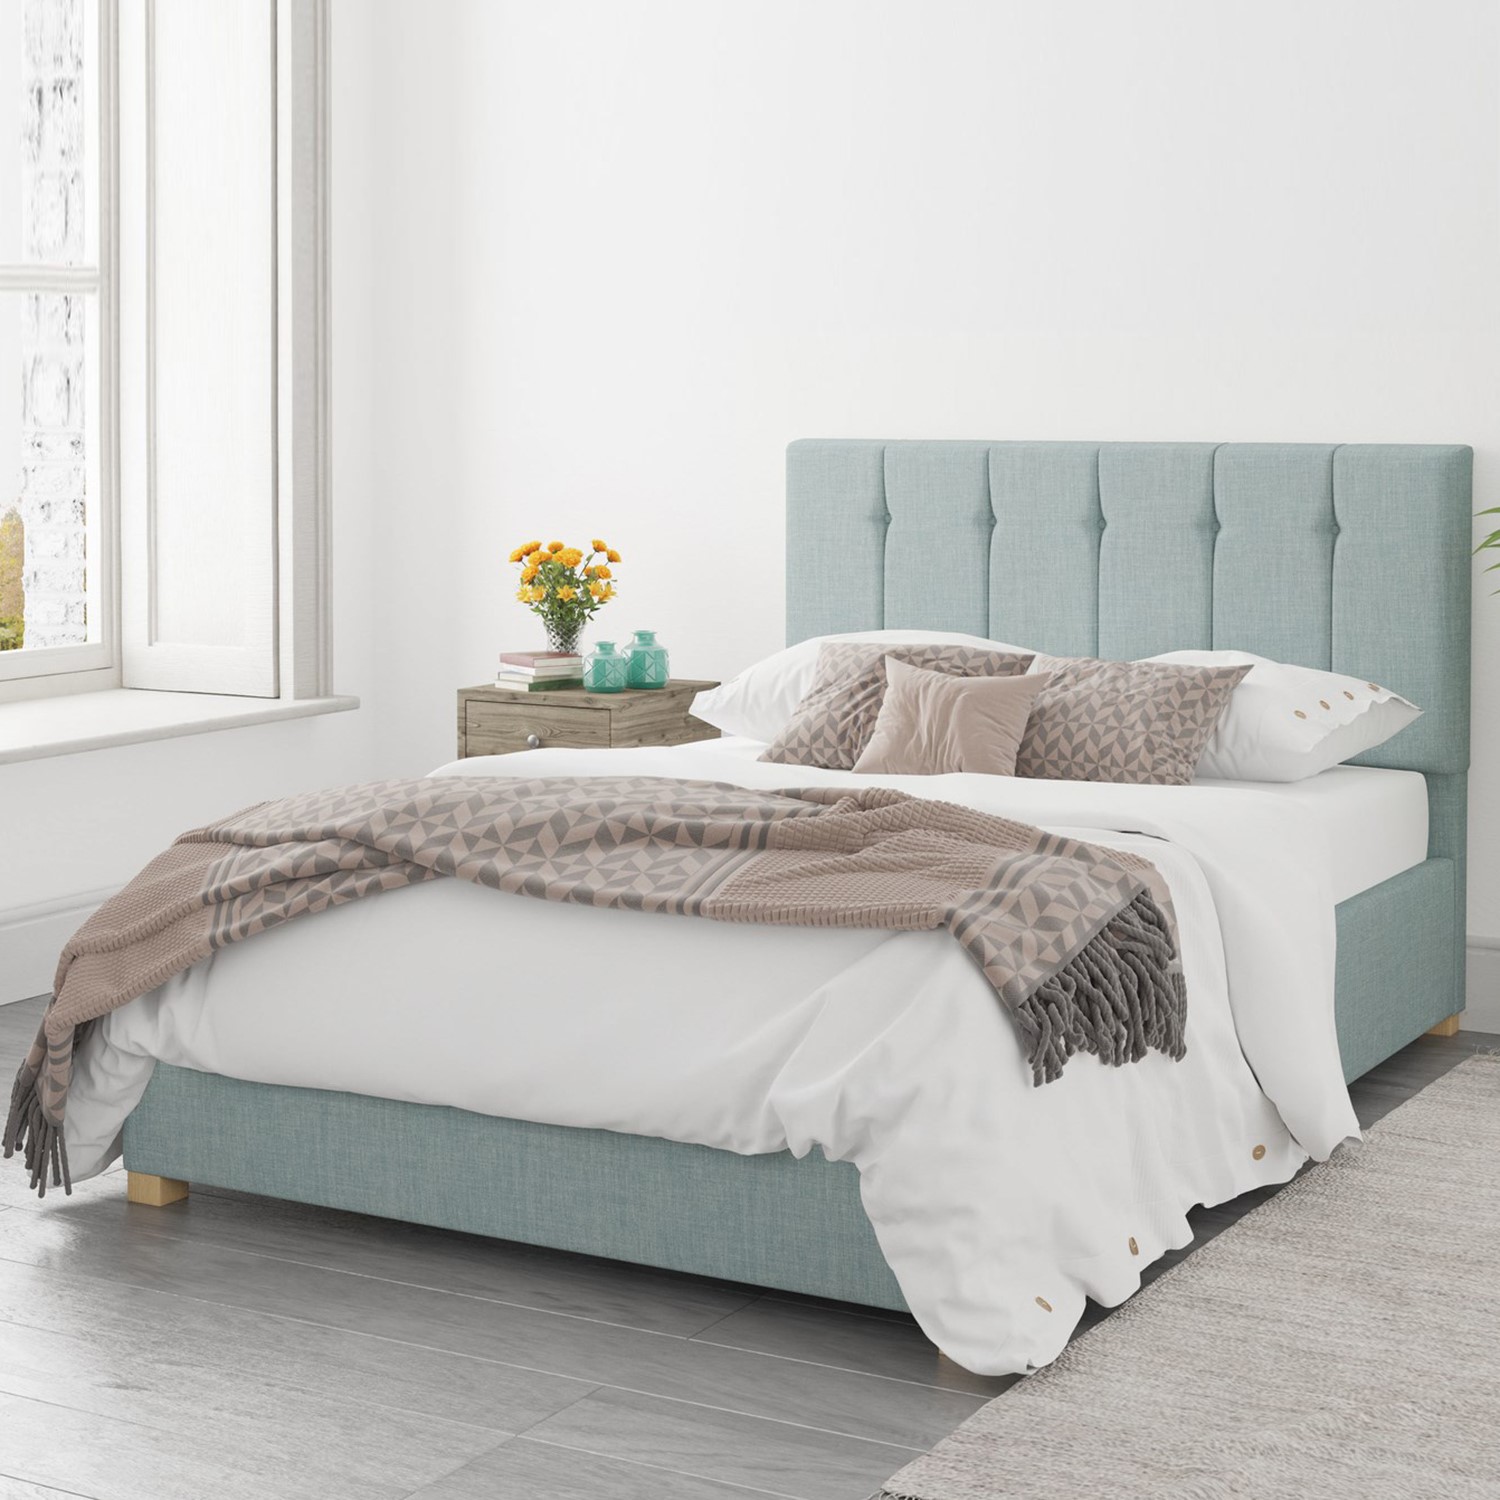 Read more about Light blue fabric king size ottoman bed pimilico aspire